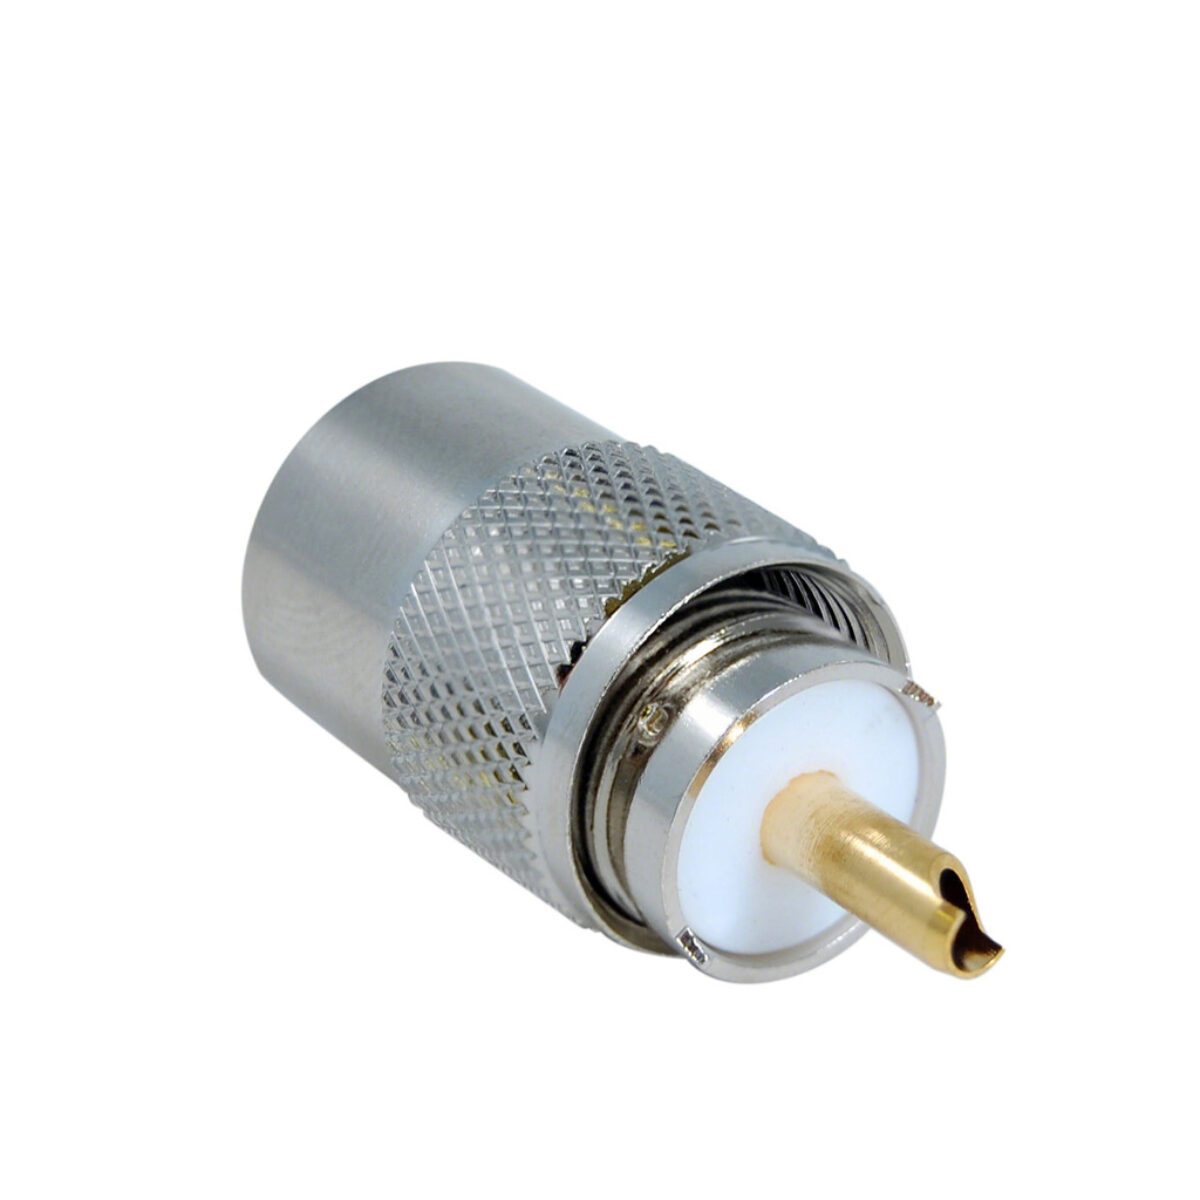 PL-259 Silver Plated Teflon UHF Connector with Silver or Gold Tip